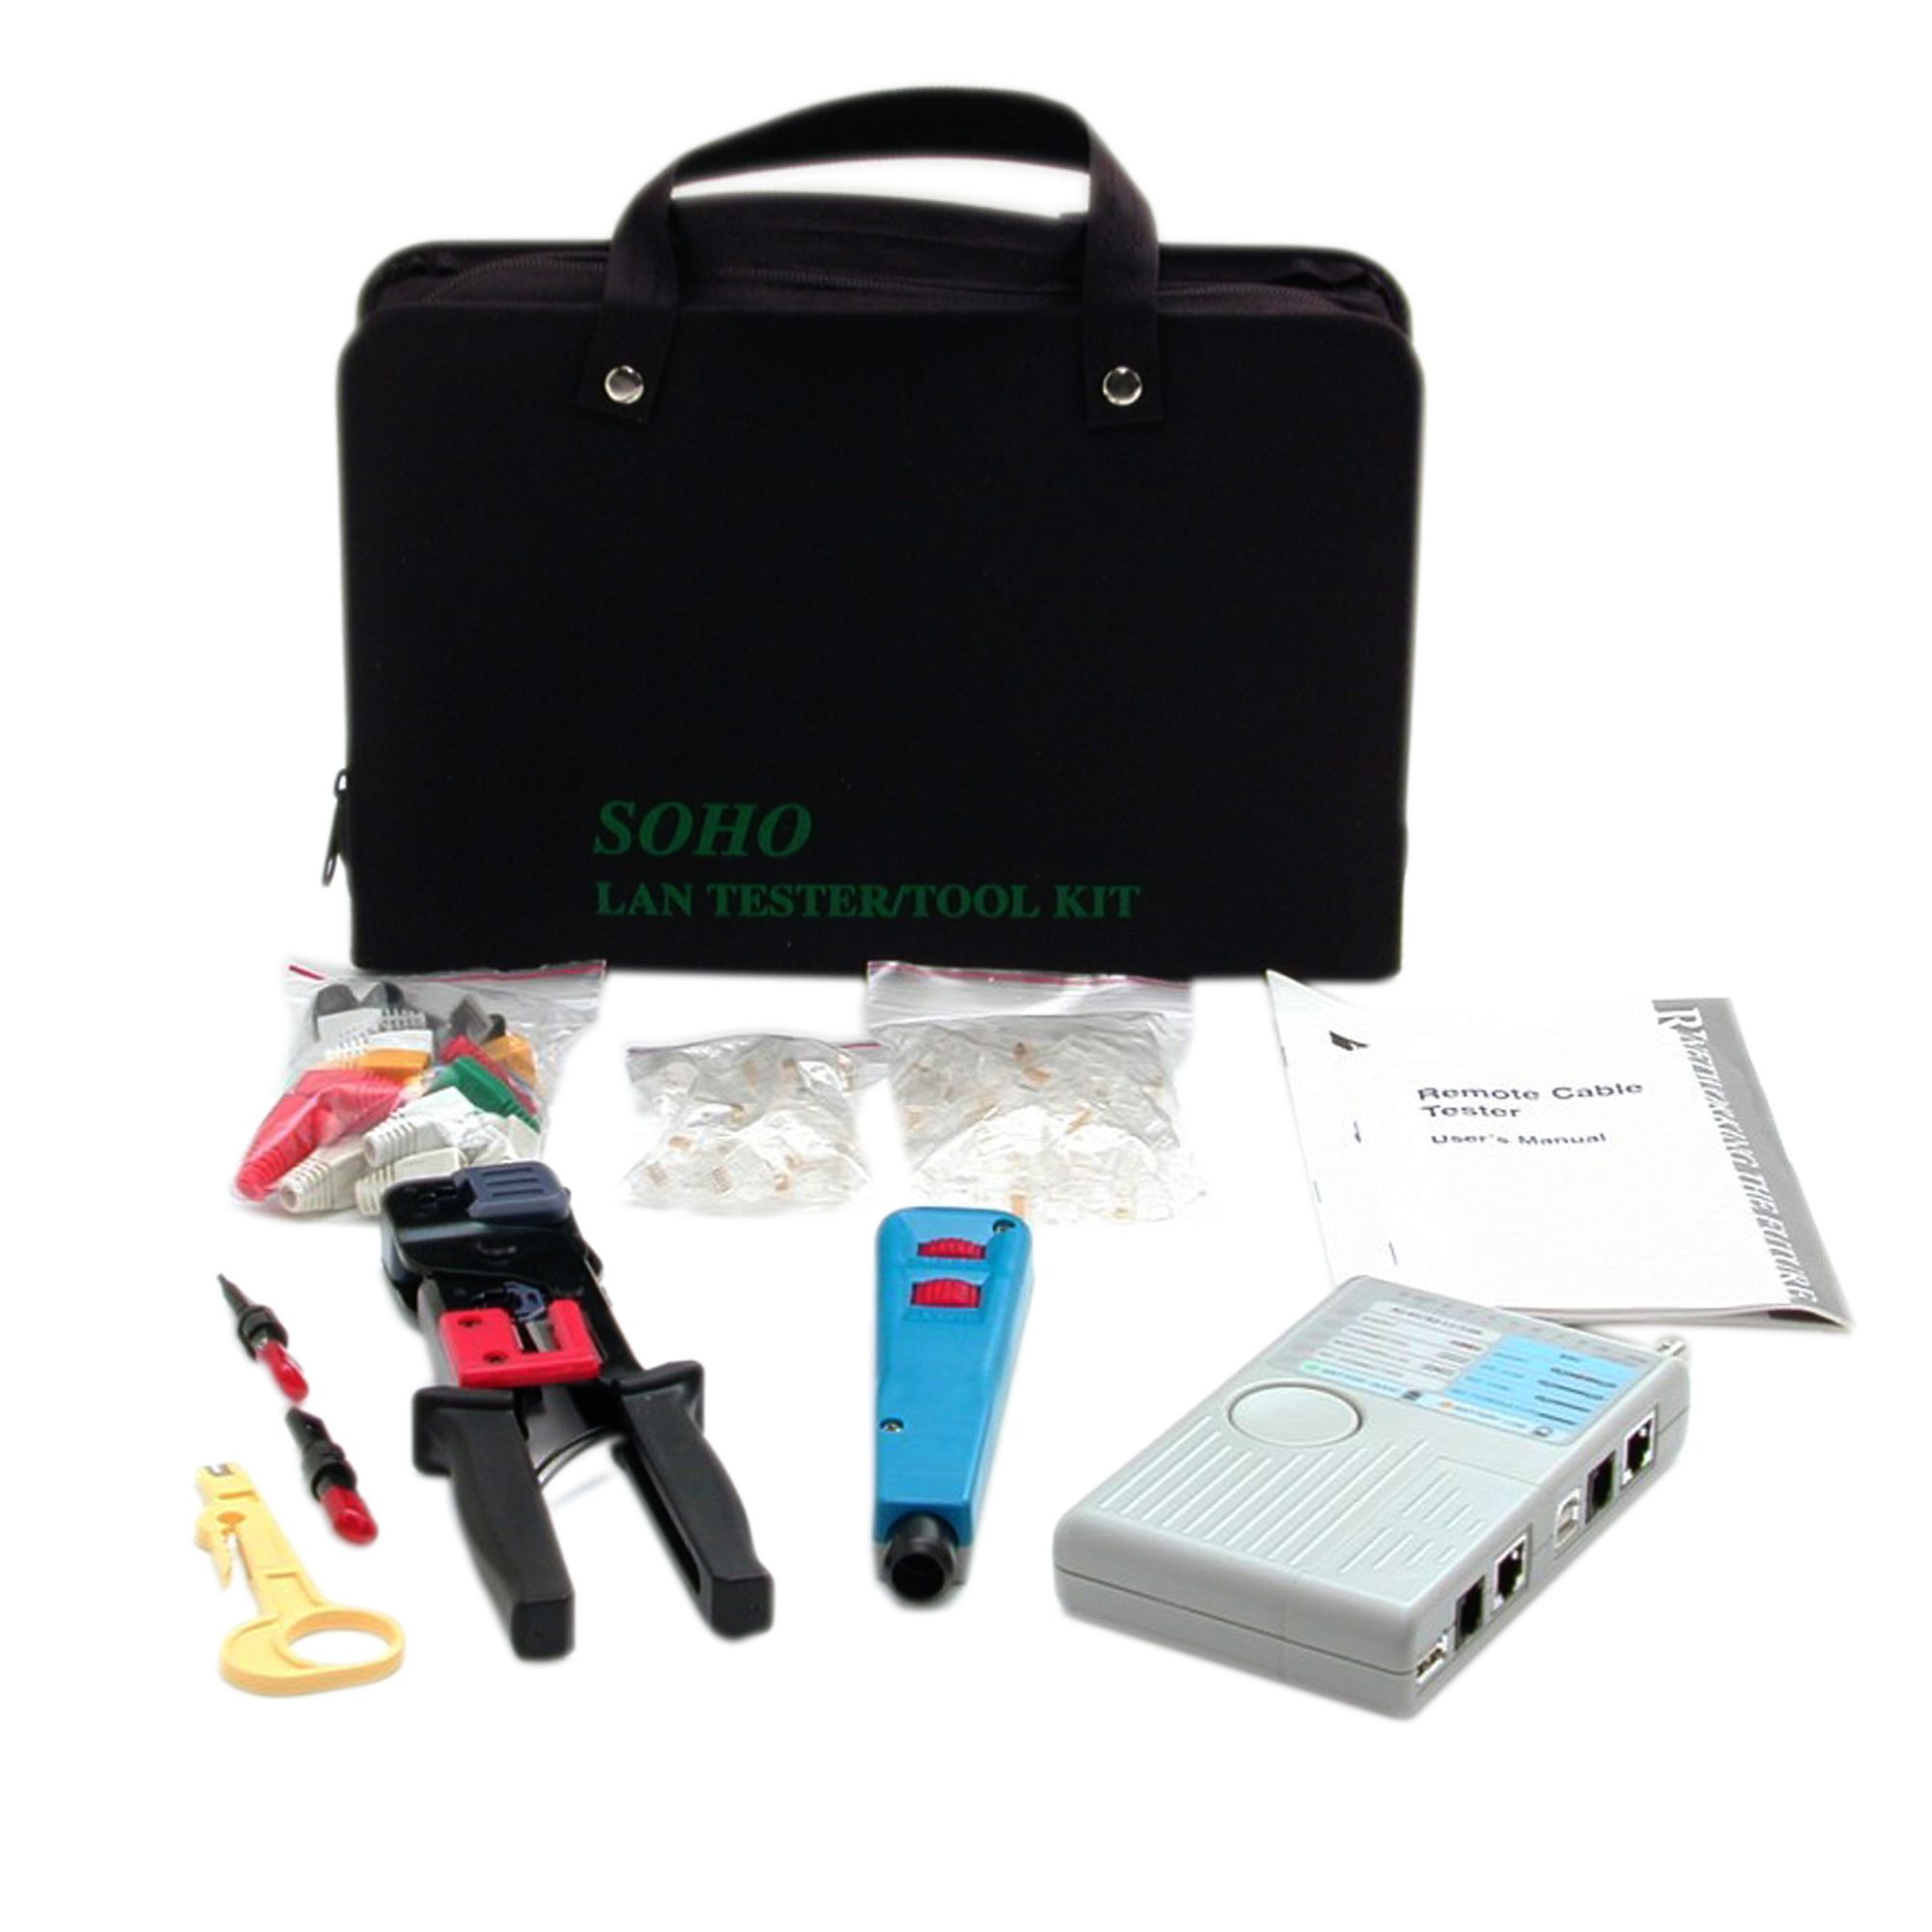  StarTech.com Cell Phone Repair Kit - with Case